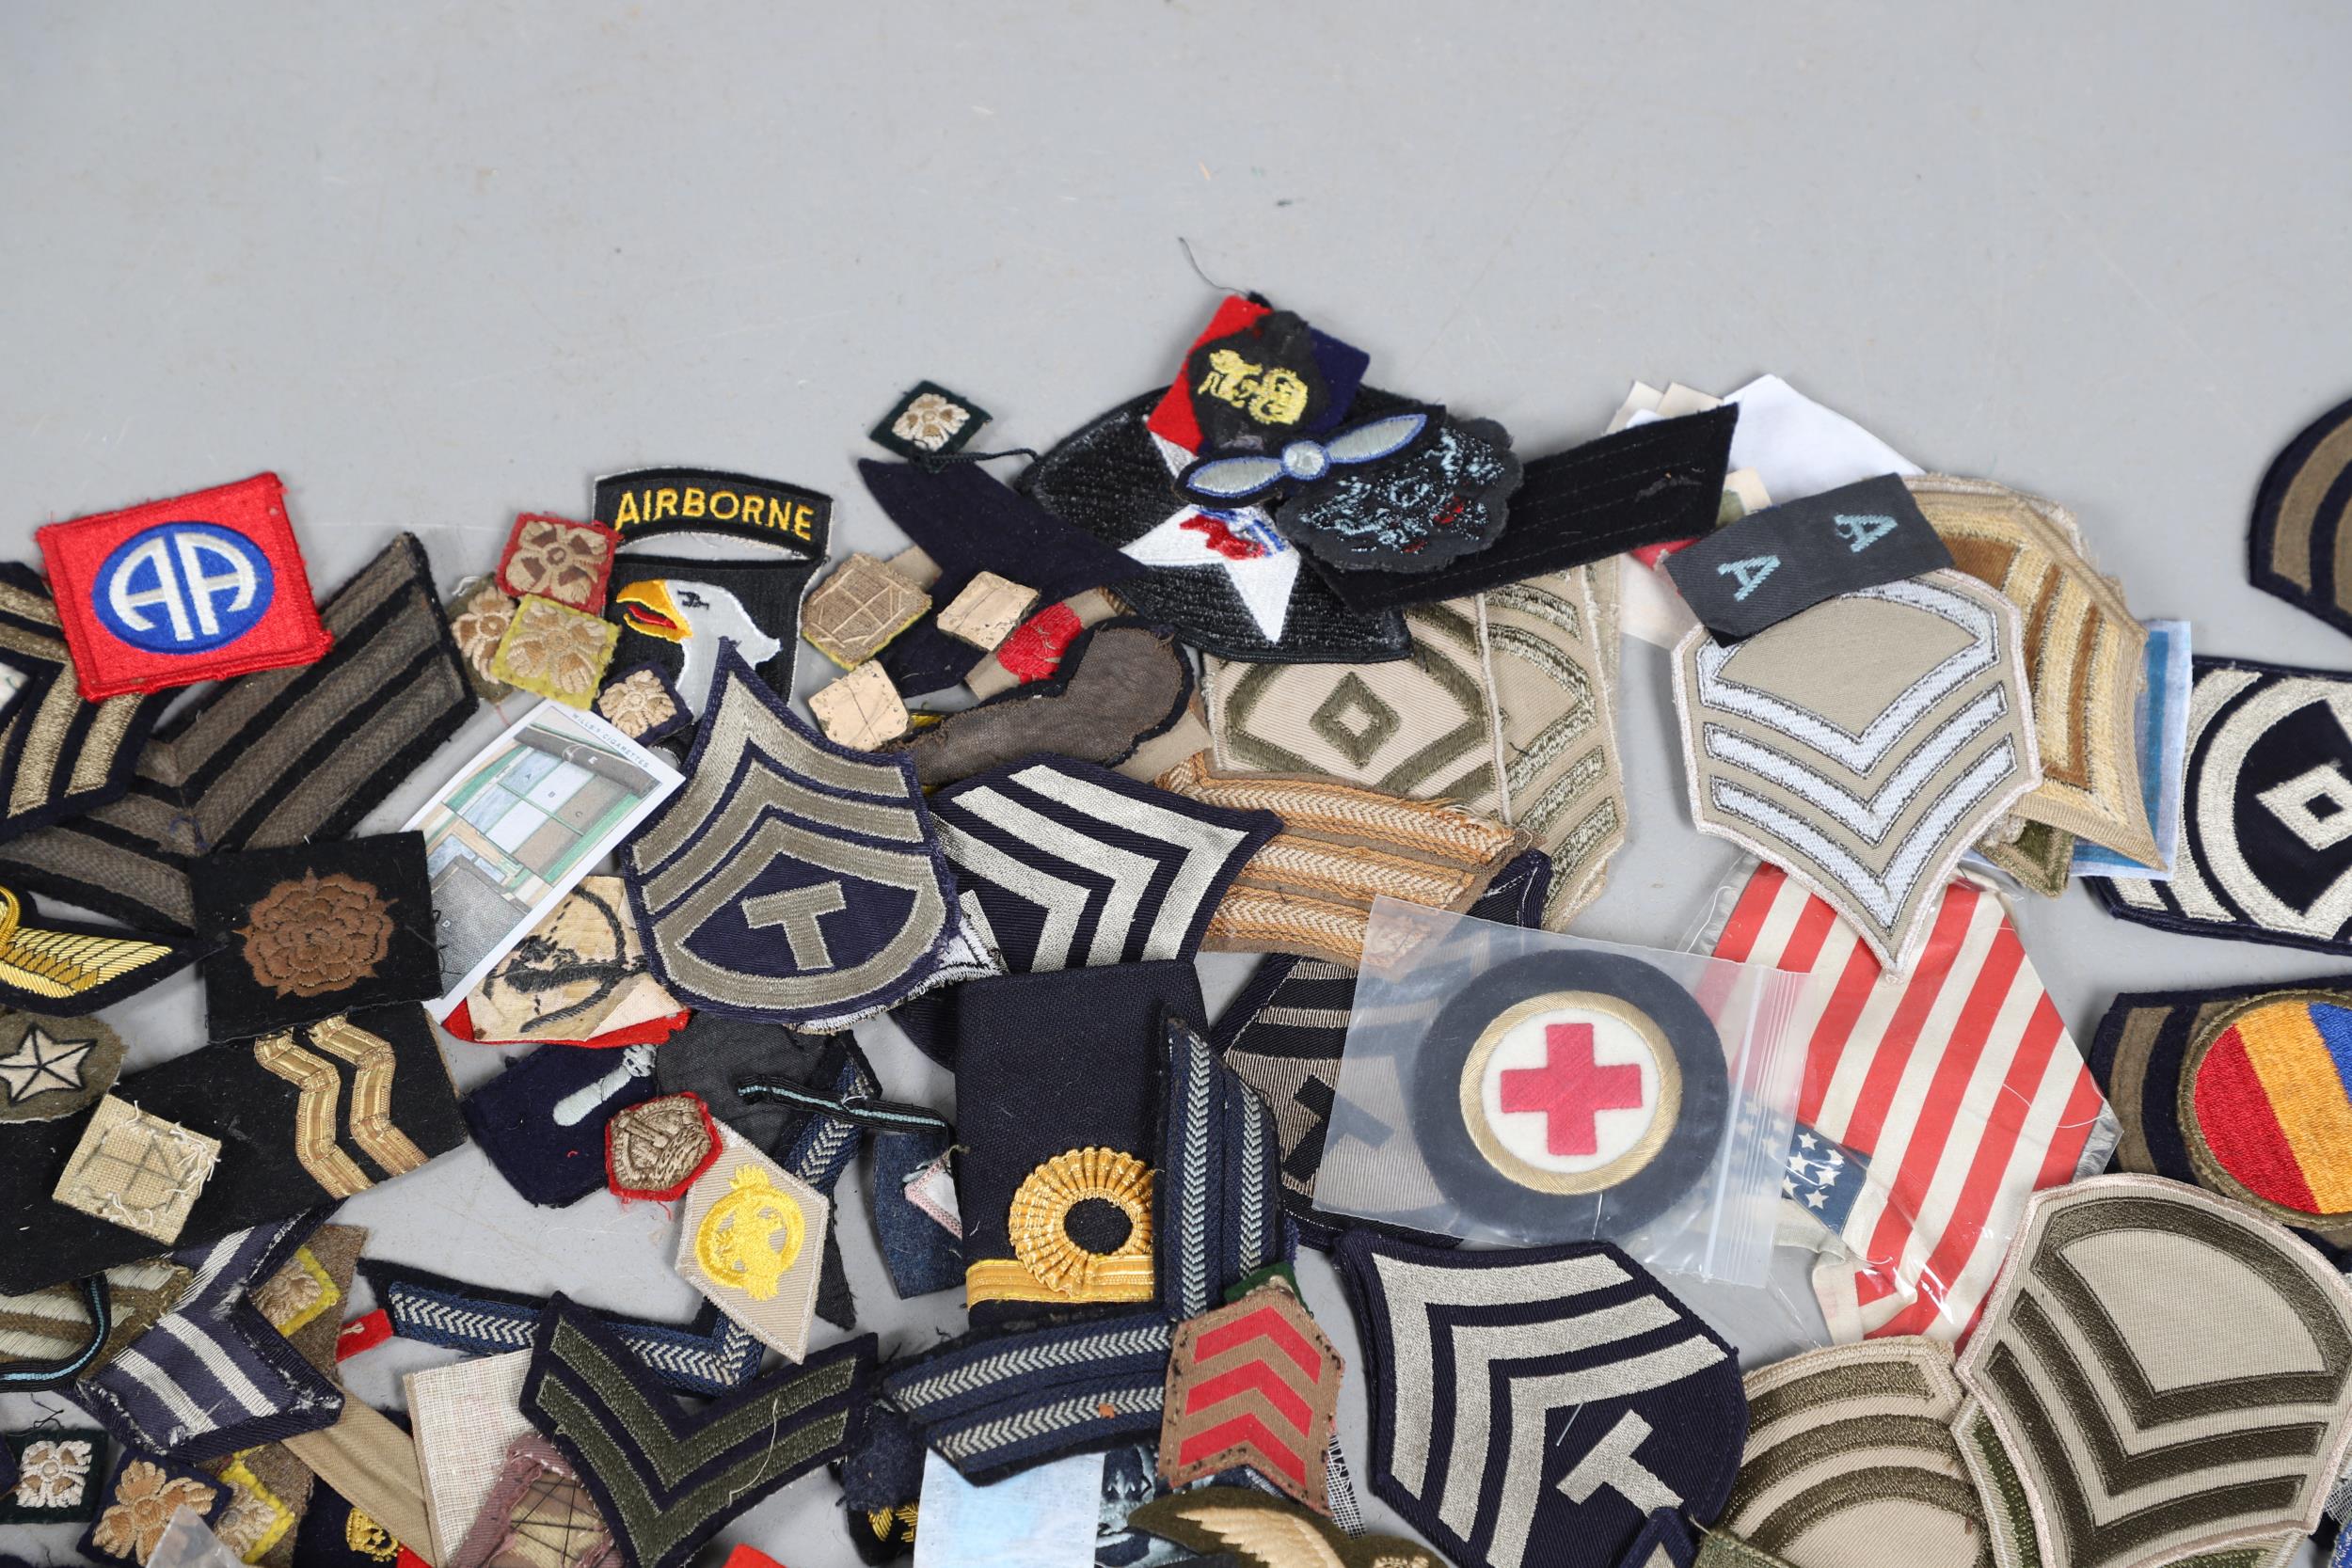 AN EXTENSIVE COLLECTION OF ARMY AND AIR FORCE UNIFORM PATCHES AND RANK INSIGNIA. - Image 3 of 14